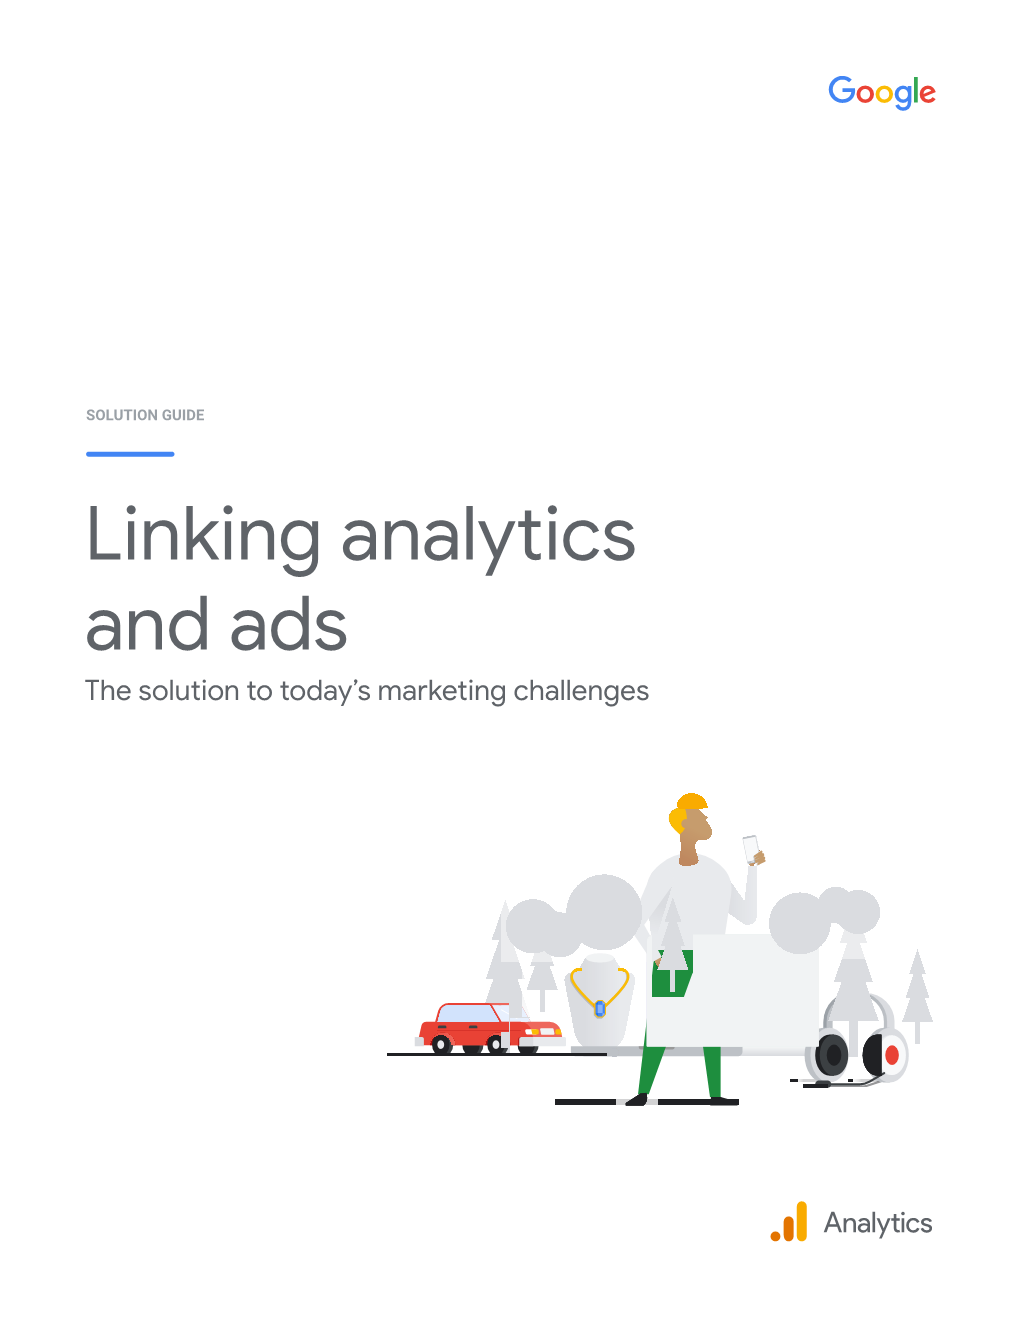 Linking Analytics and Ads the Solution to Today’S Marketing Challenges